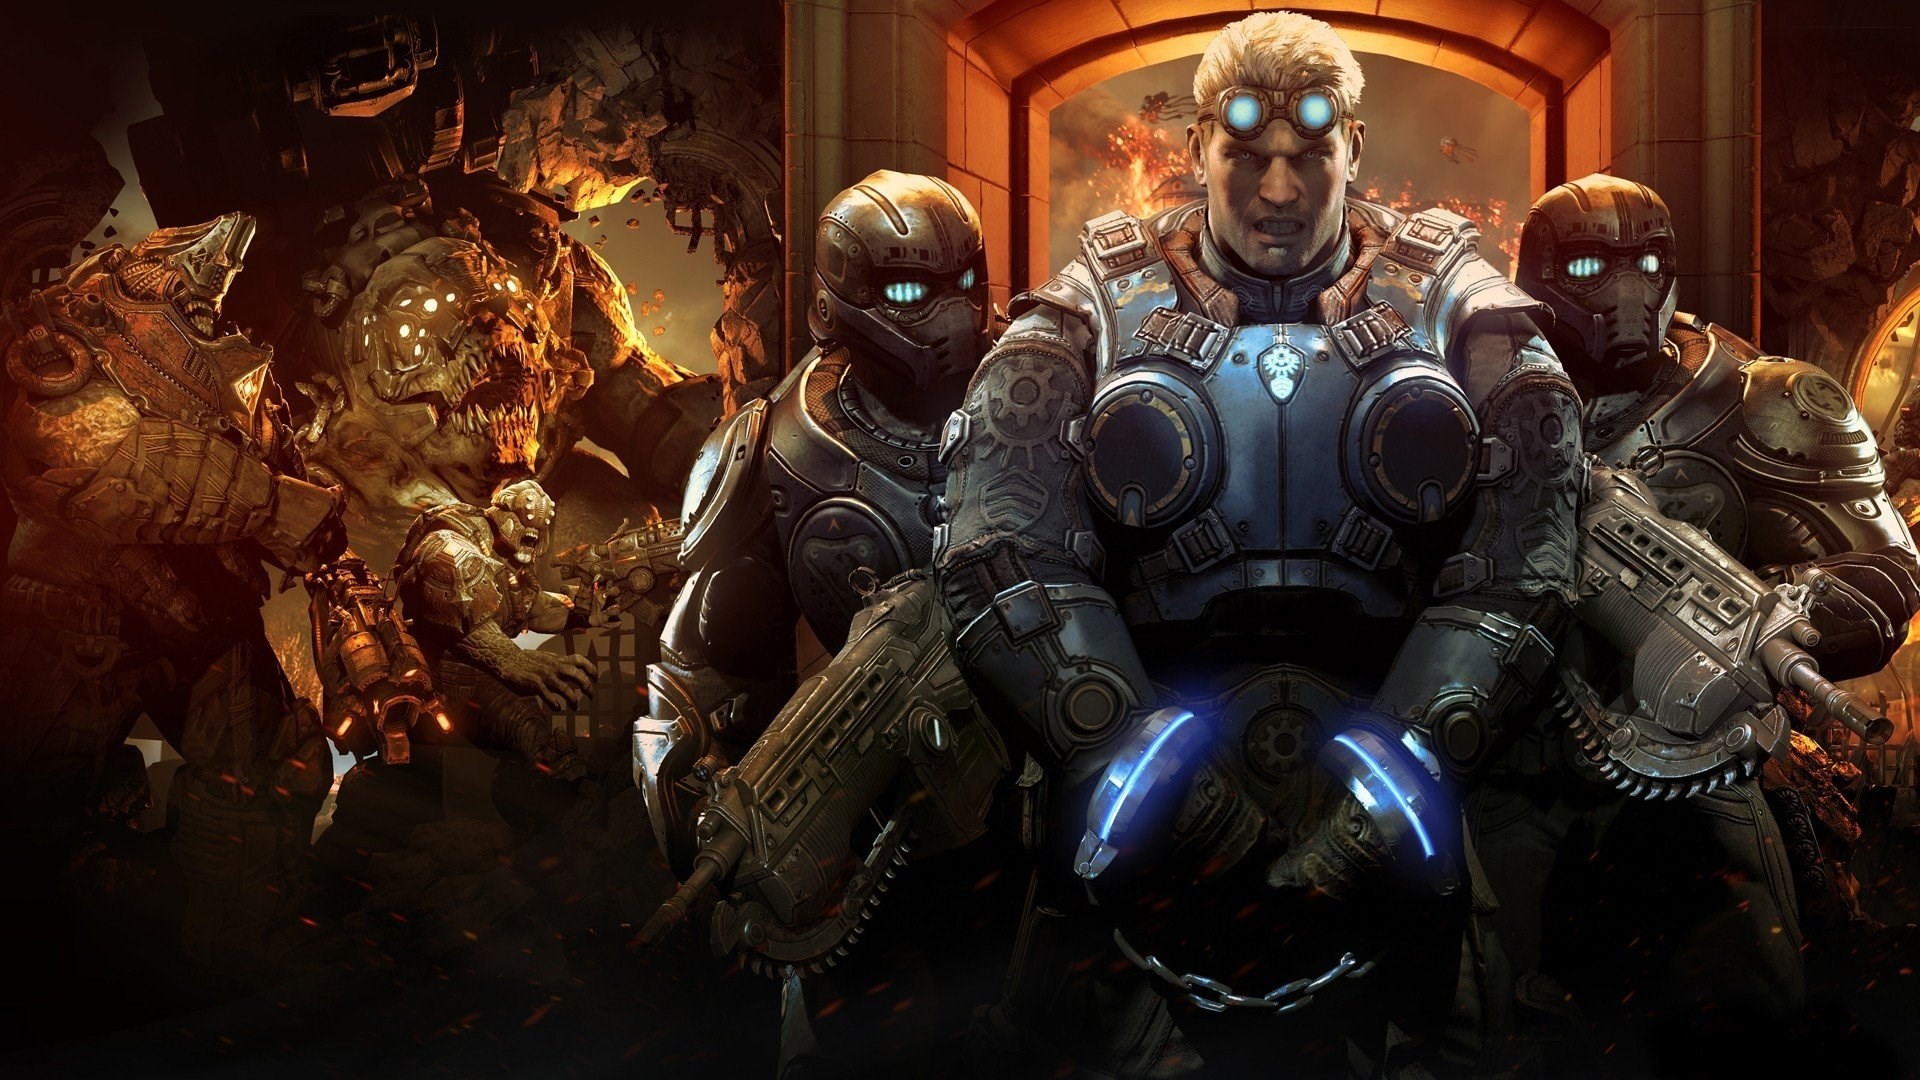 Gears of War Background (76+ images)